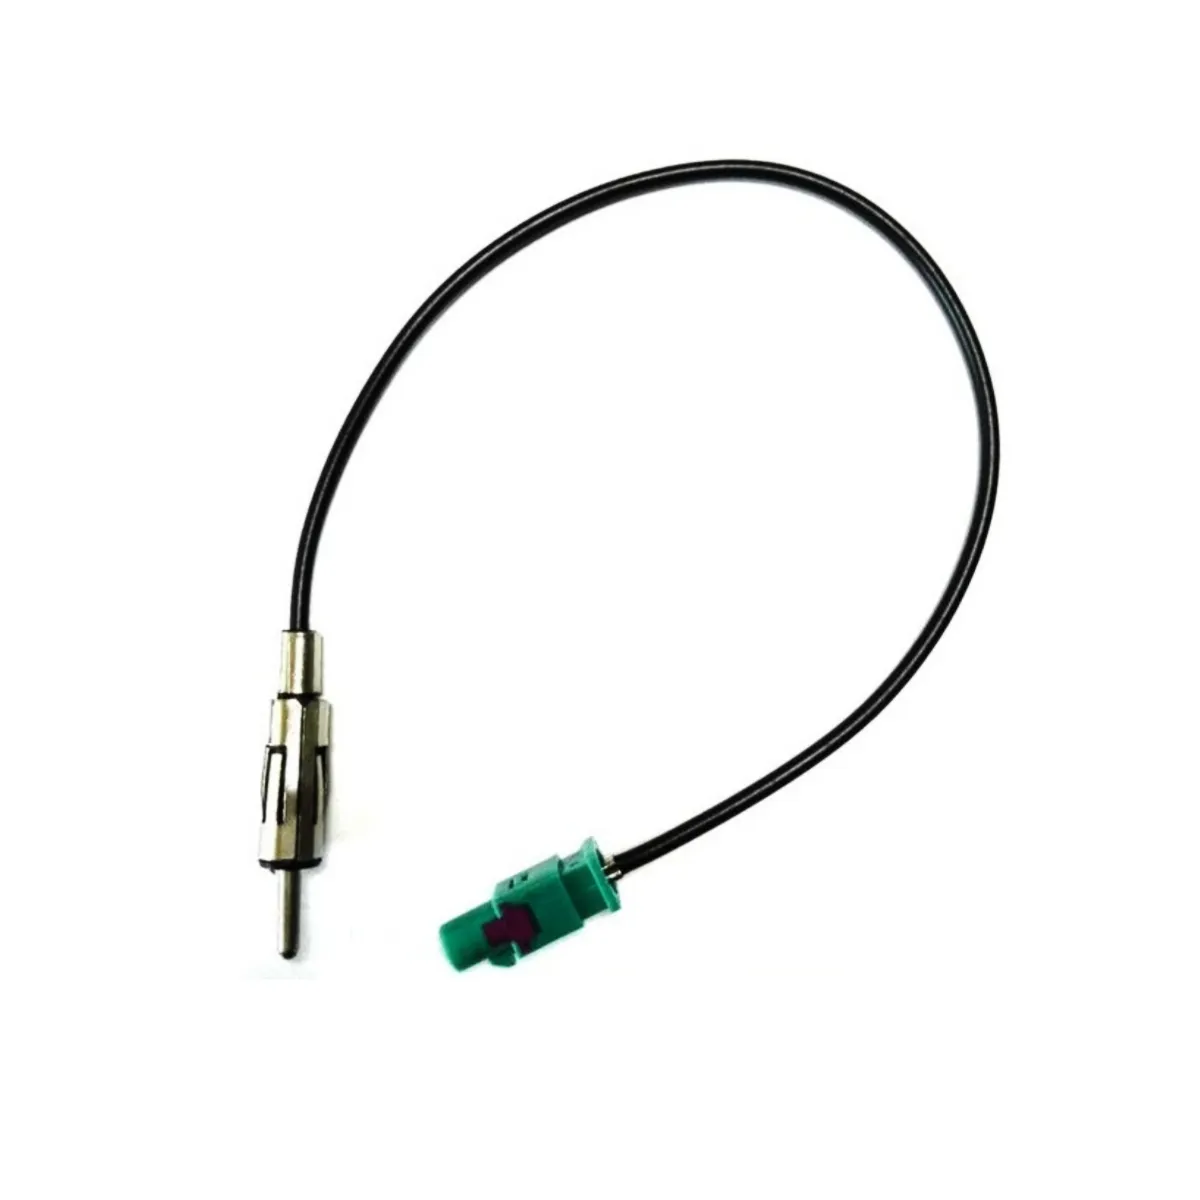 Car antenna plug with fakra male connector cable antenna extension cable